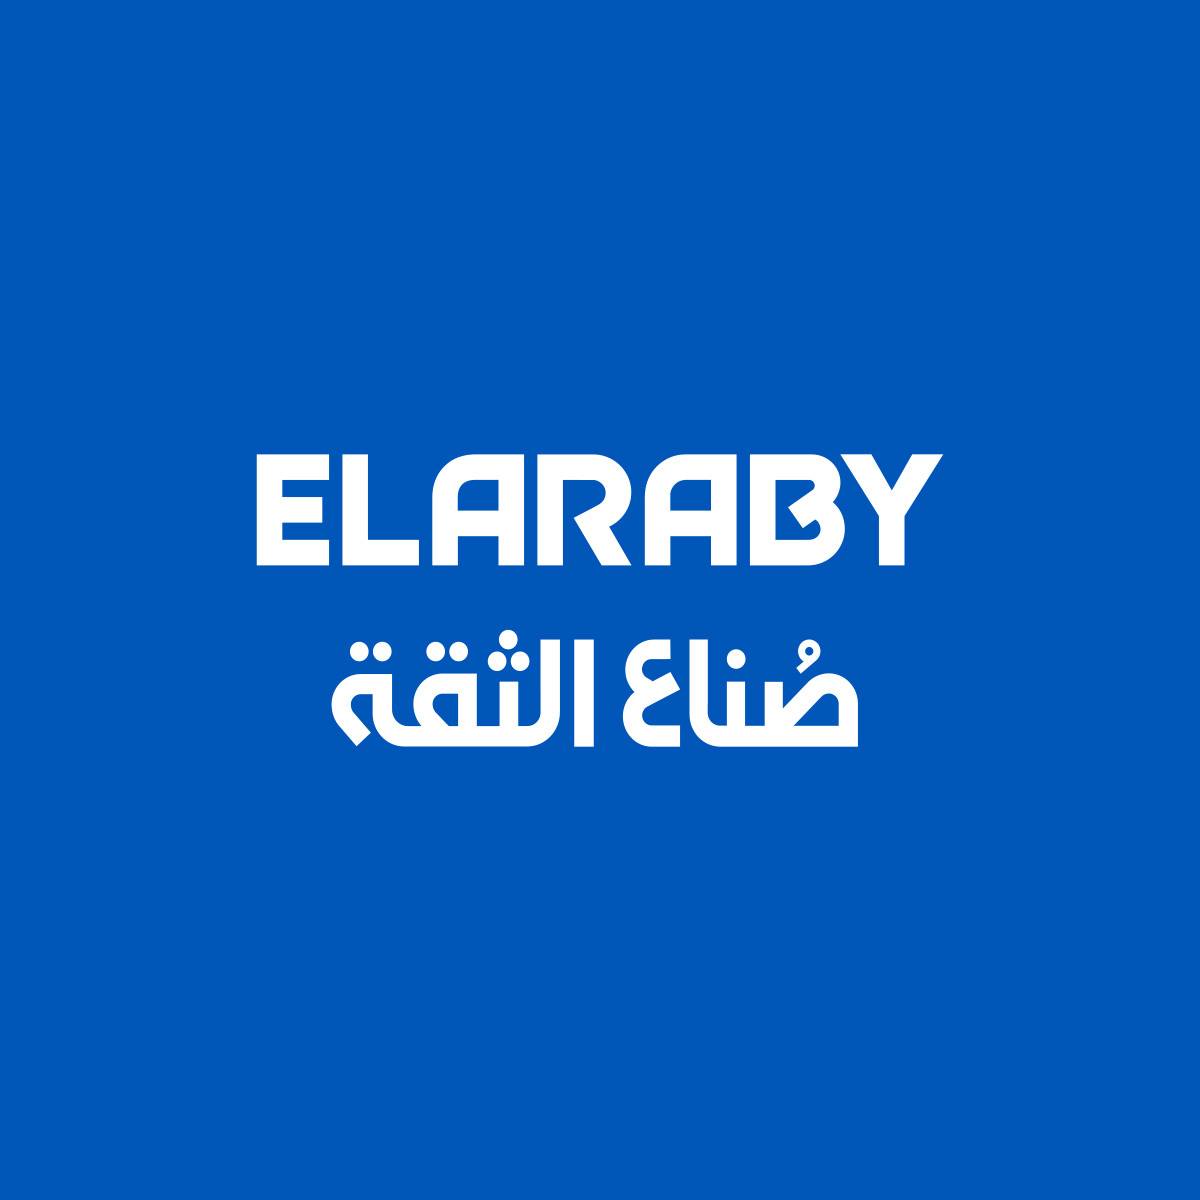 🚨 #CyberAttack Alert 🚨

🇪🇬 #Egypt: ELARABY Group has reportedly been hacked by the LockBit 3.0 ransomware group.

ELARABY is one of the largest industrial and commercial corporations in Egypt, the Middle East and Africa.

Ransom deadline: 21st May 24.

#Ransomware #DataBreach…